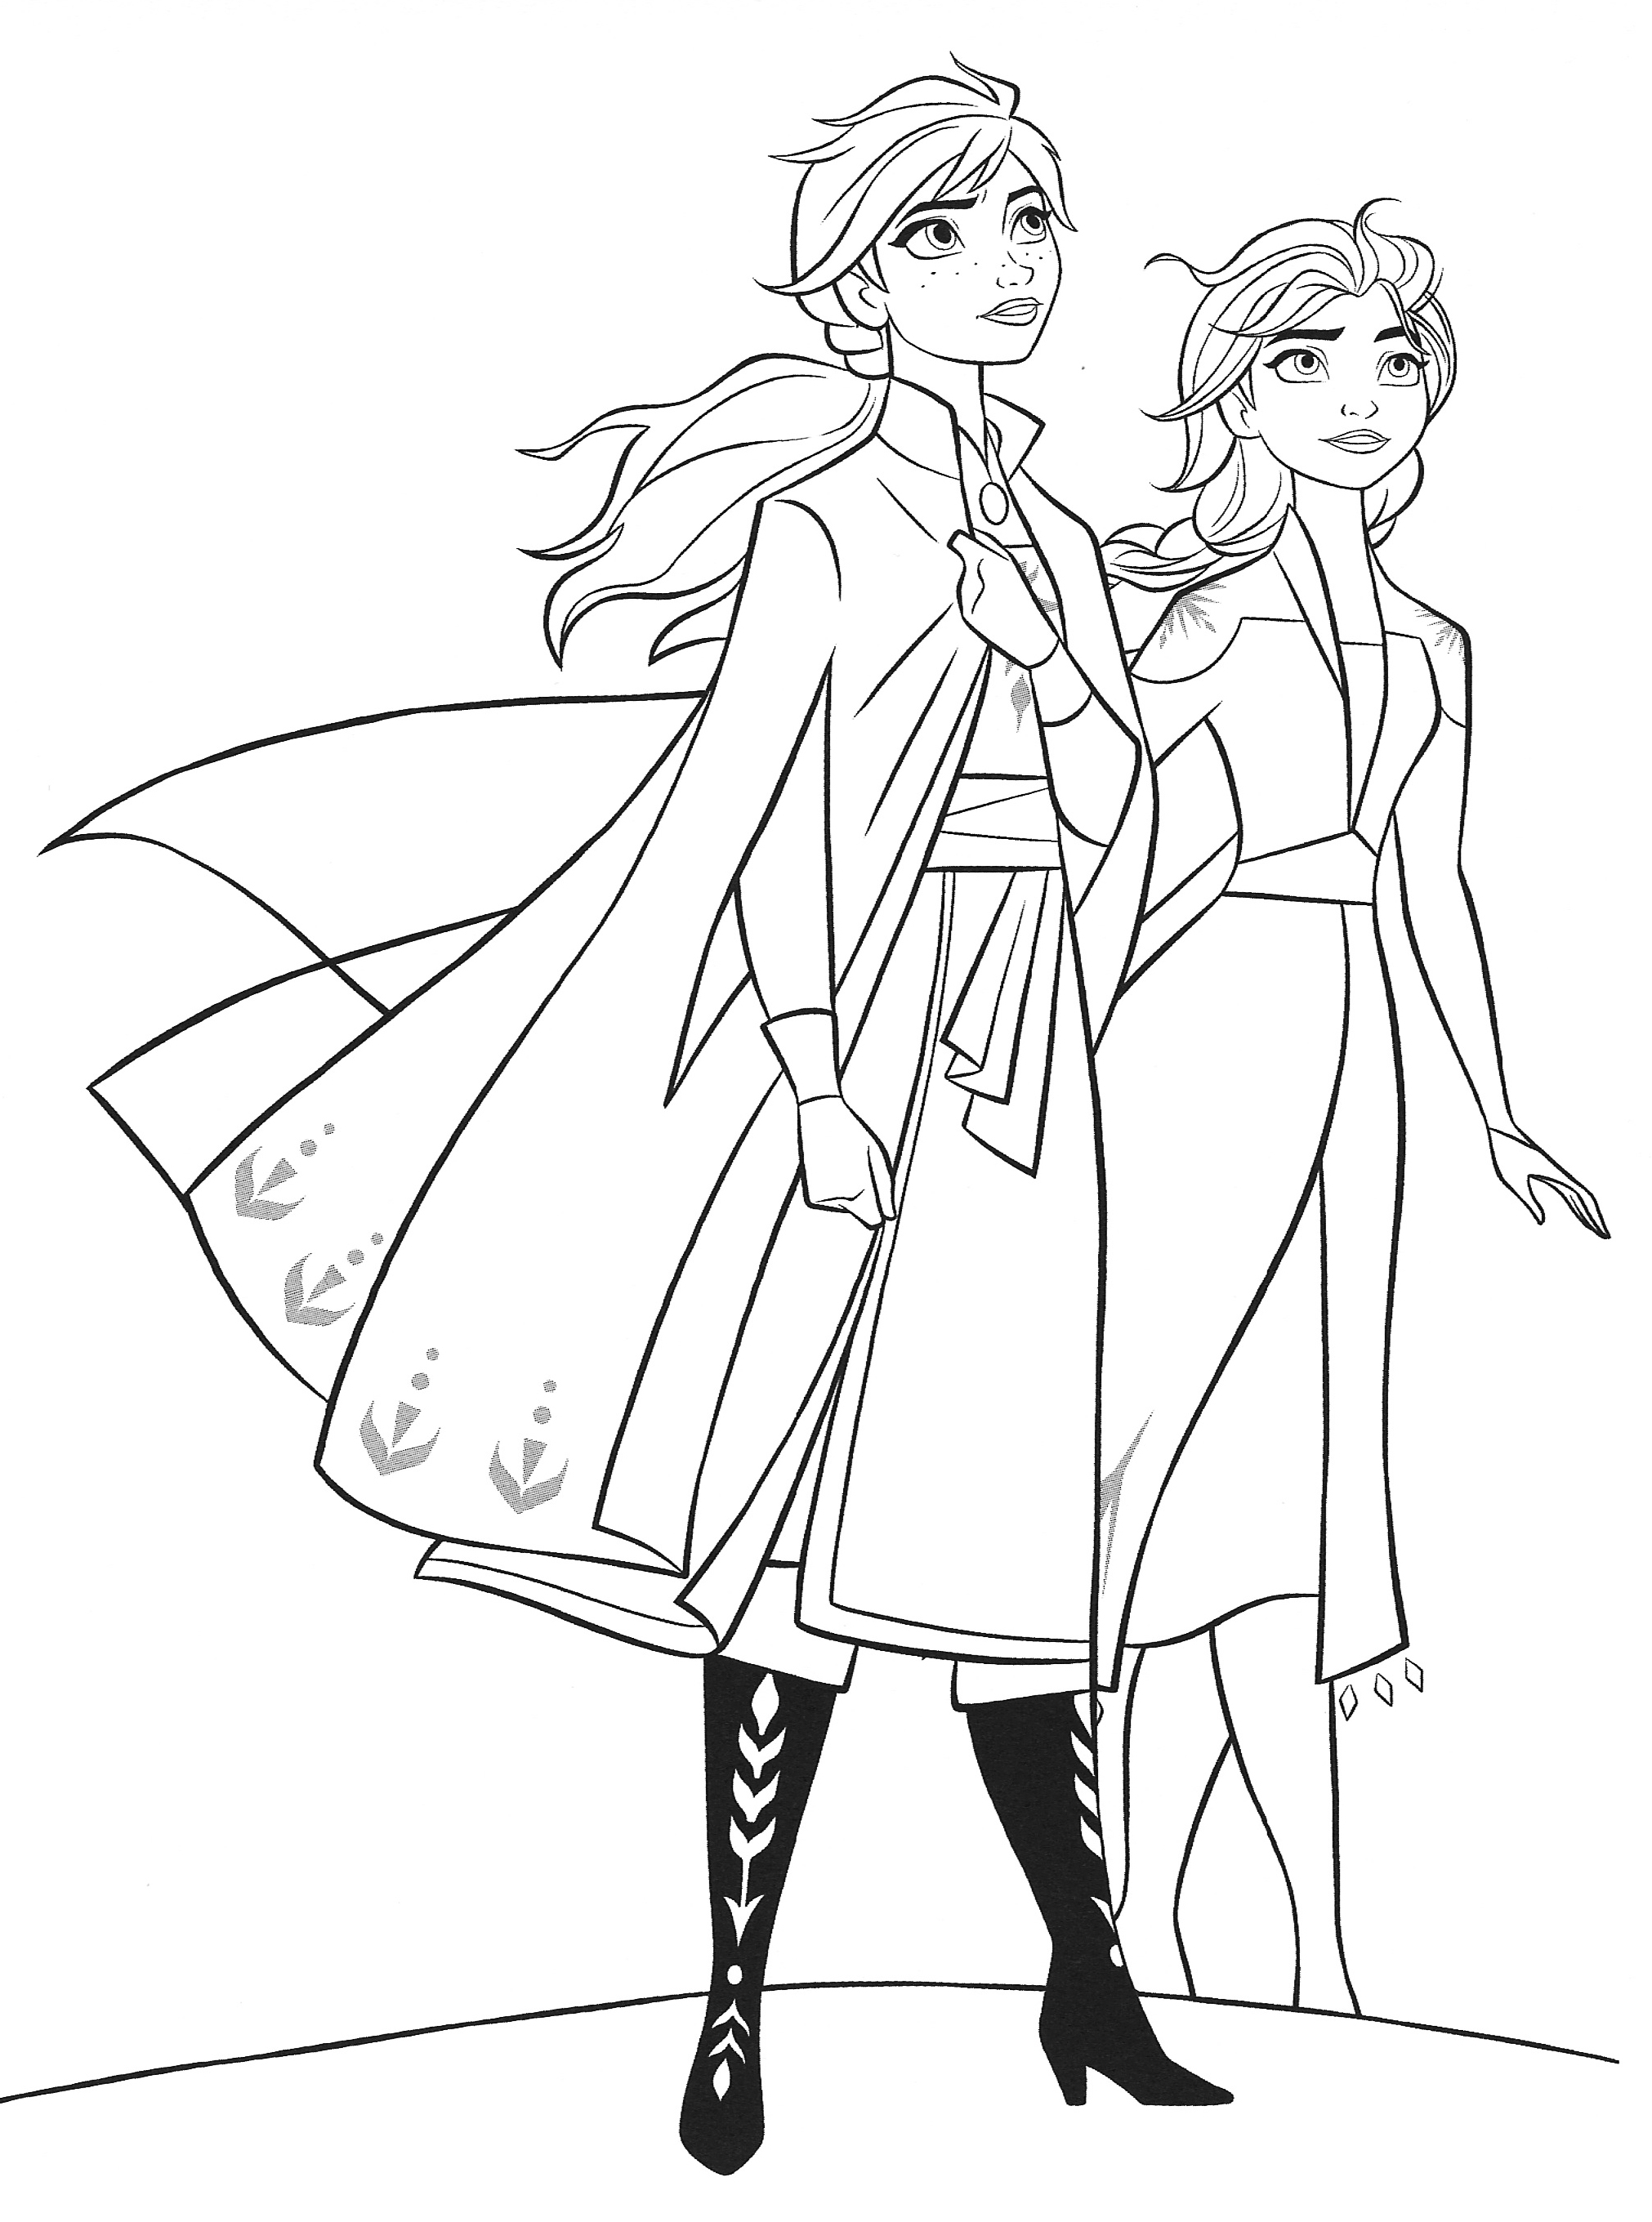 Frozen elsa and anna coloring pages